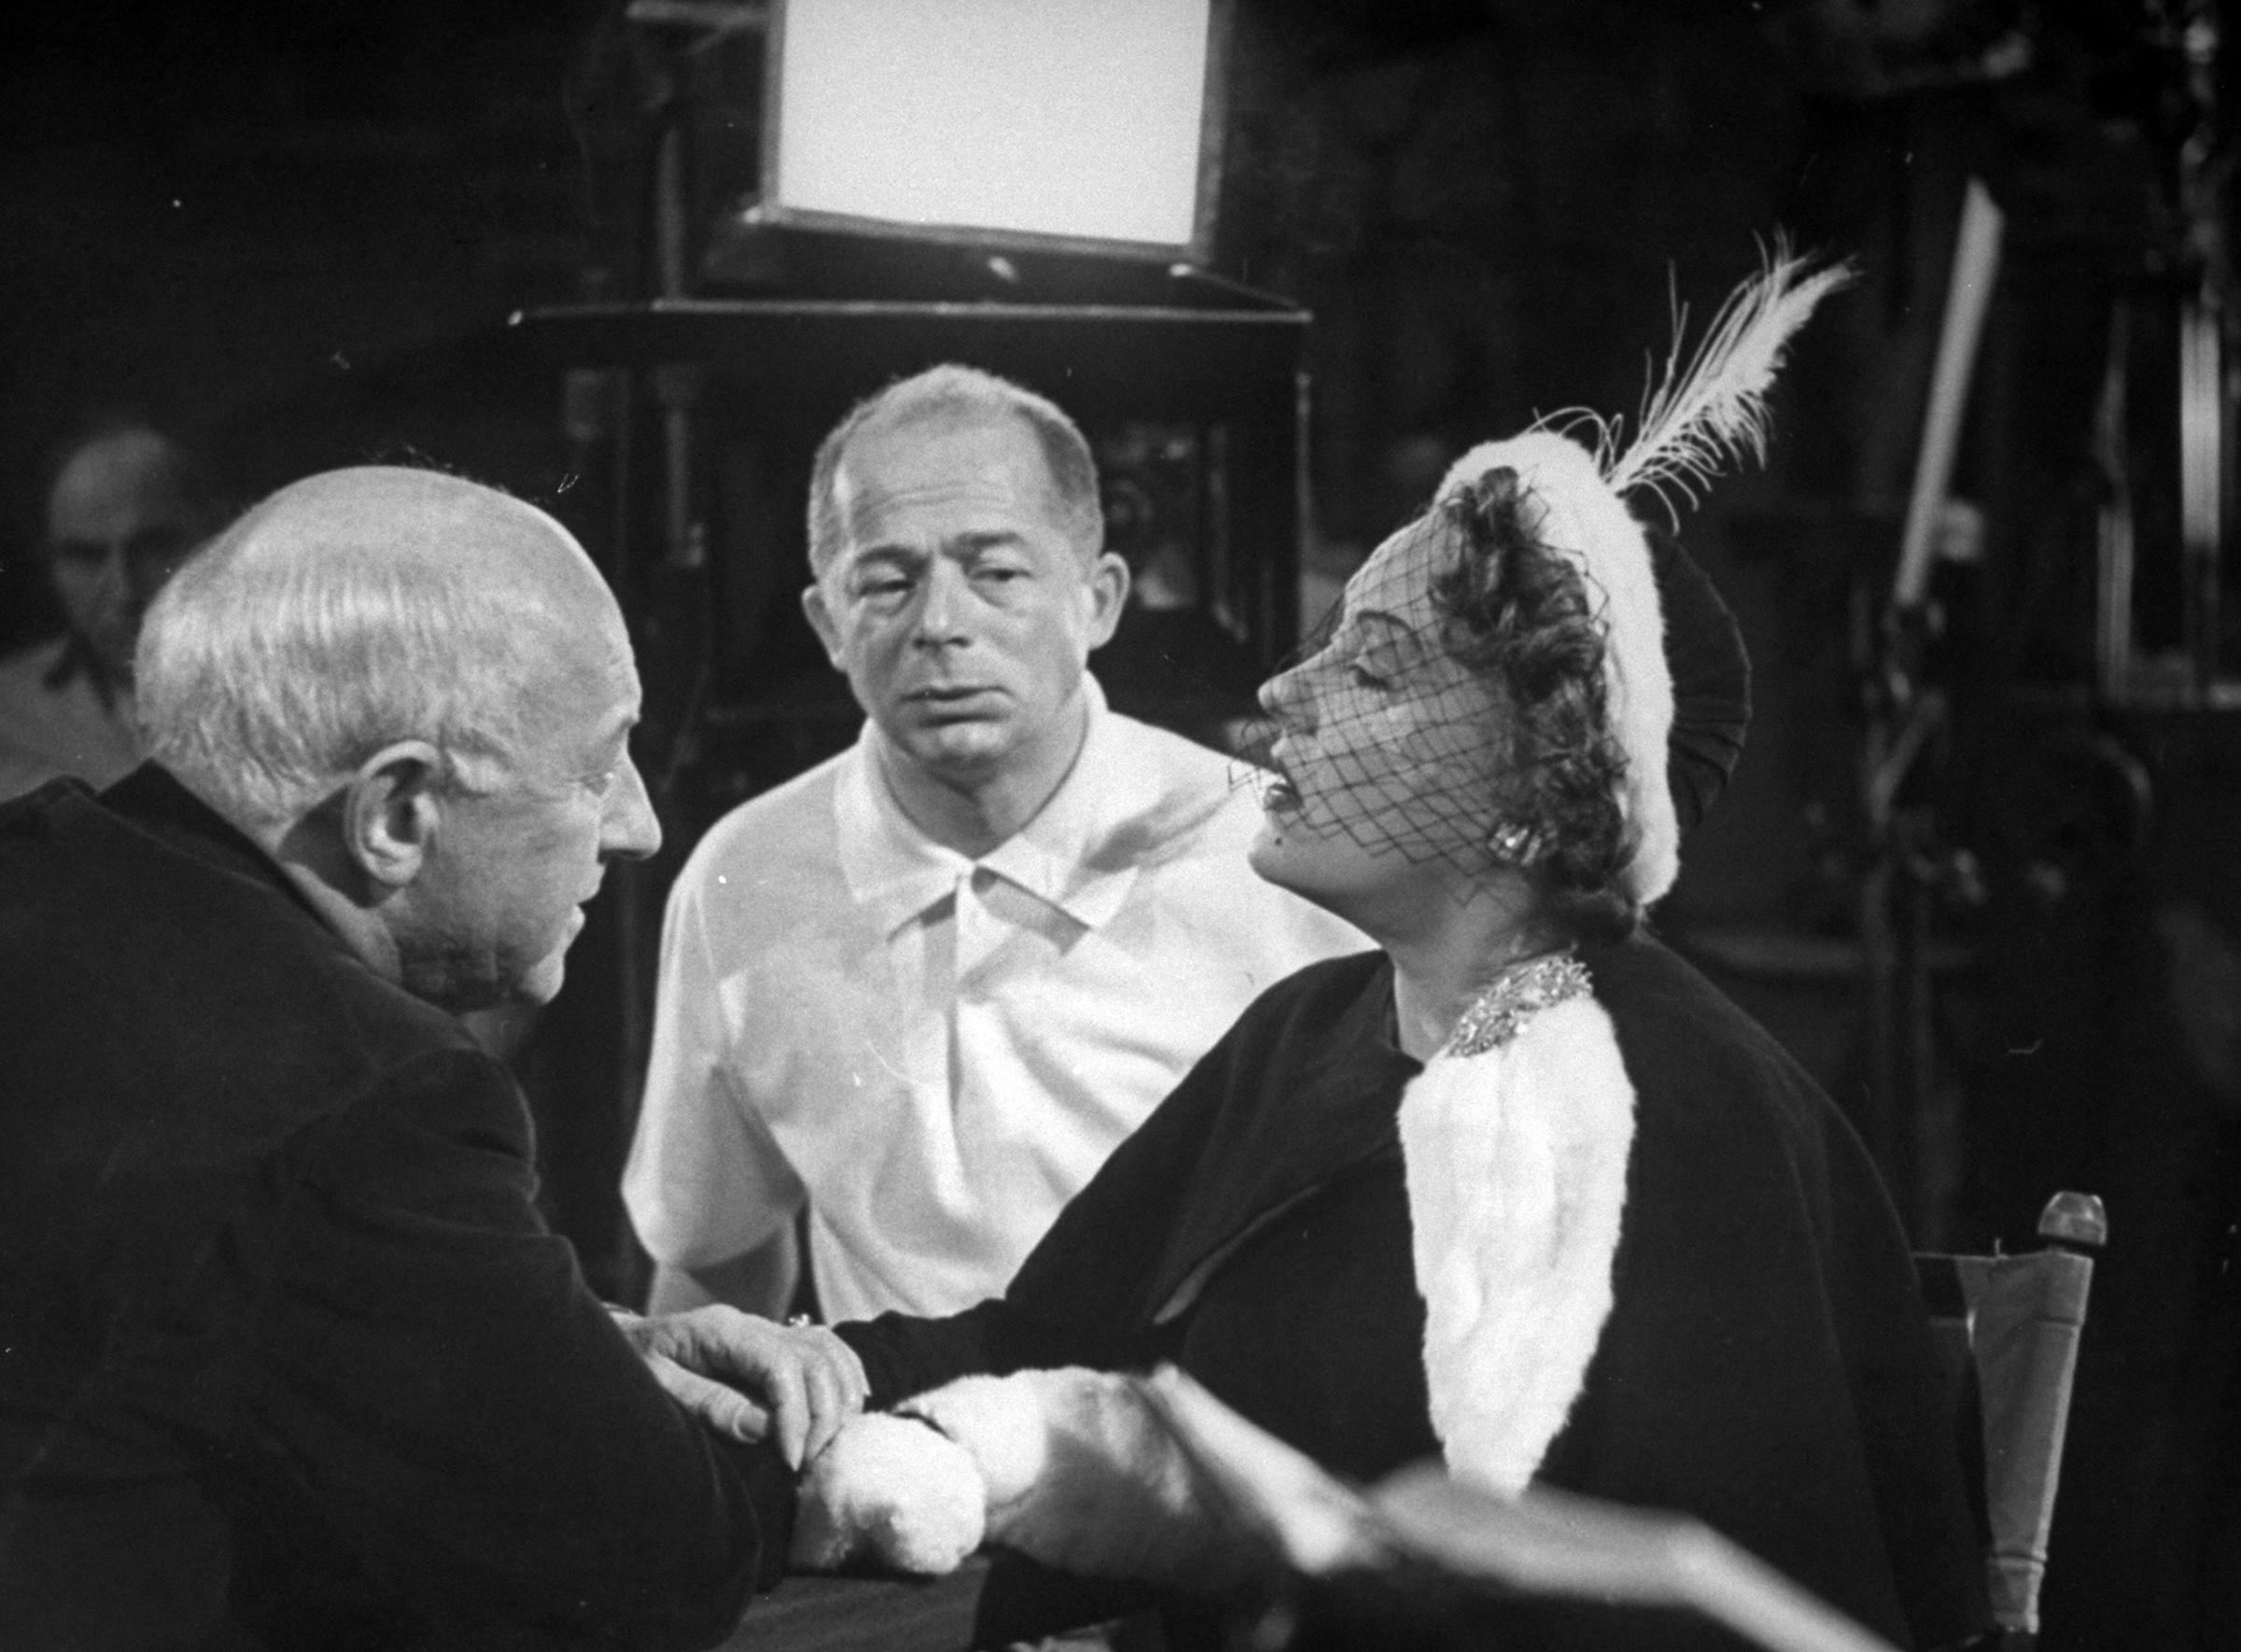 Cecil B. DeMille, Billy Wilder and Gloria Swanson during the filming of "Sunset Blvd."in 1949.